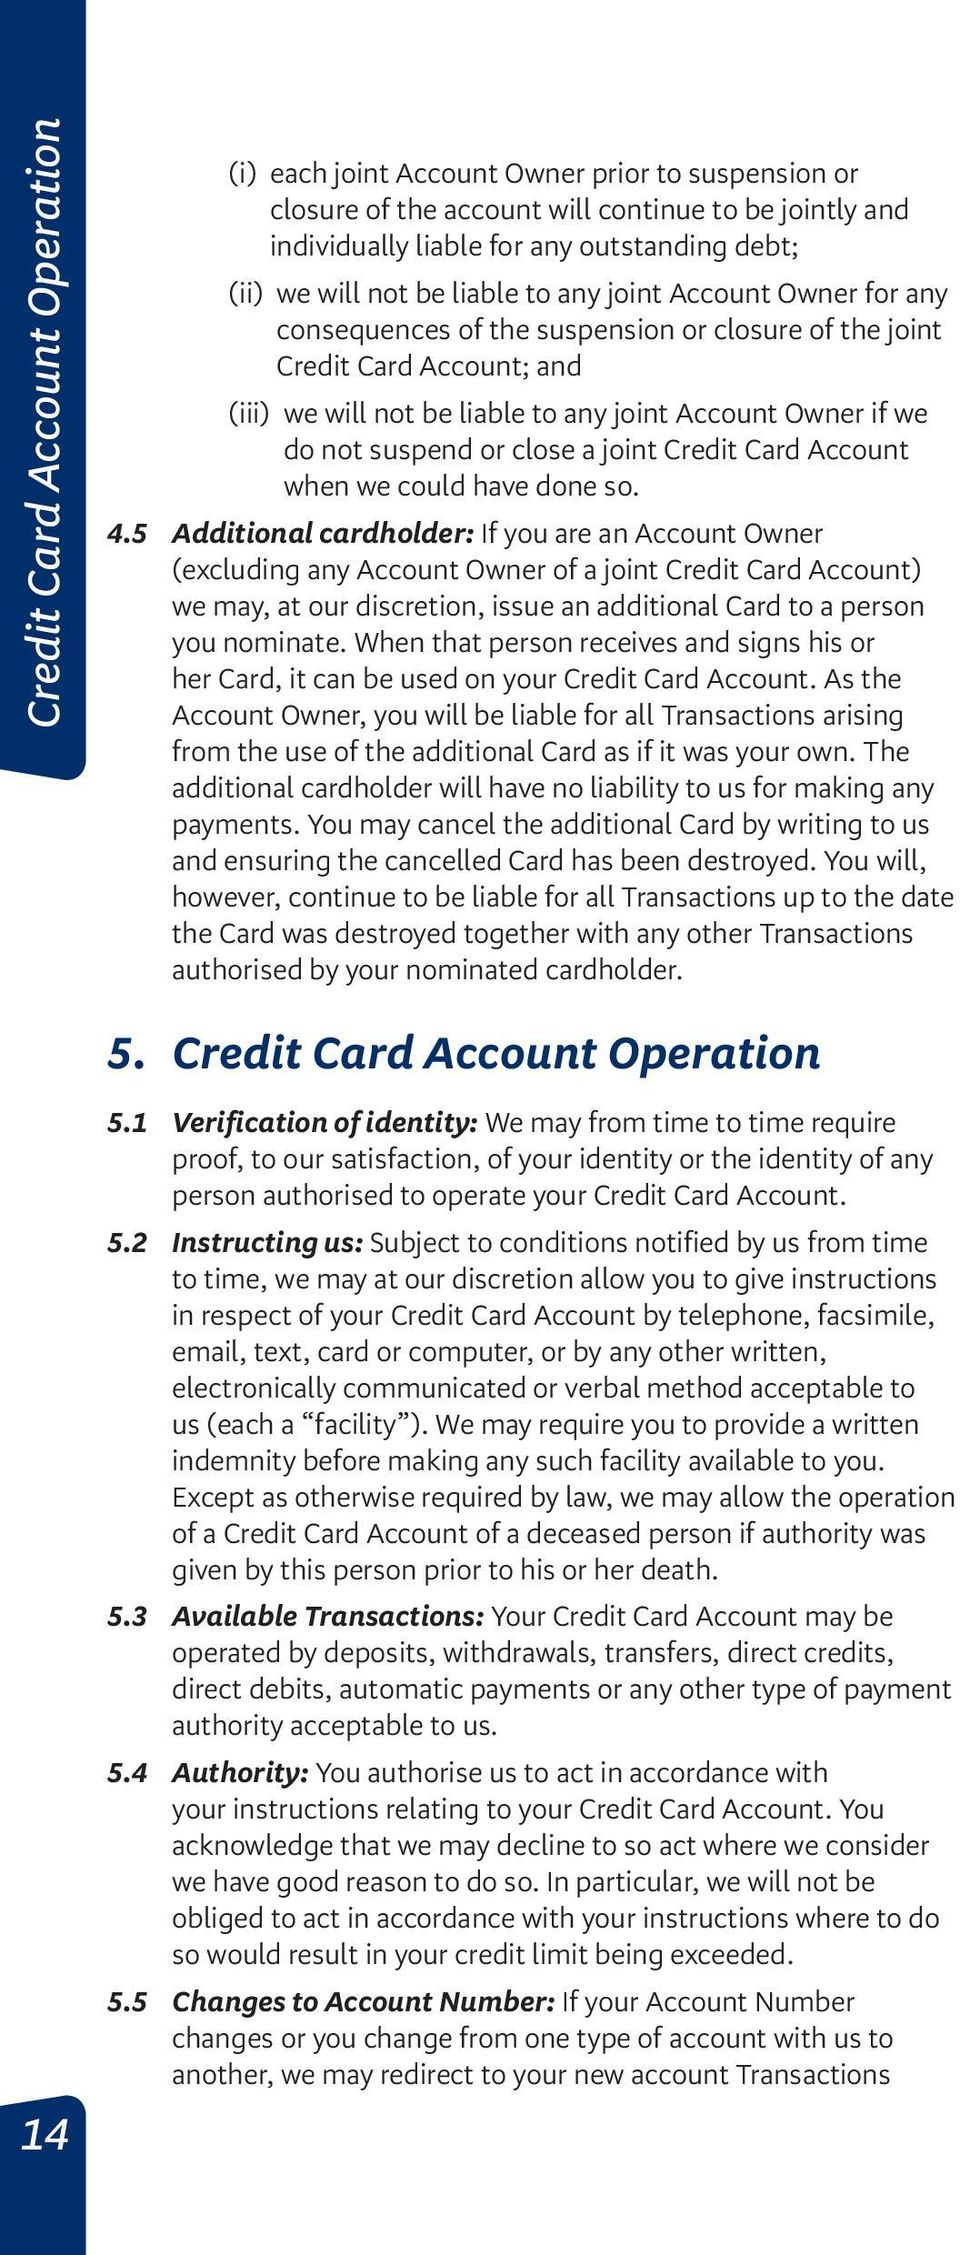 suspend or close a joint Credit Card Account when we could have done so. 4.